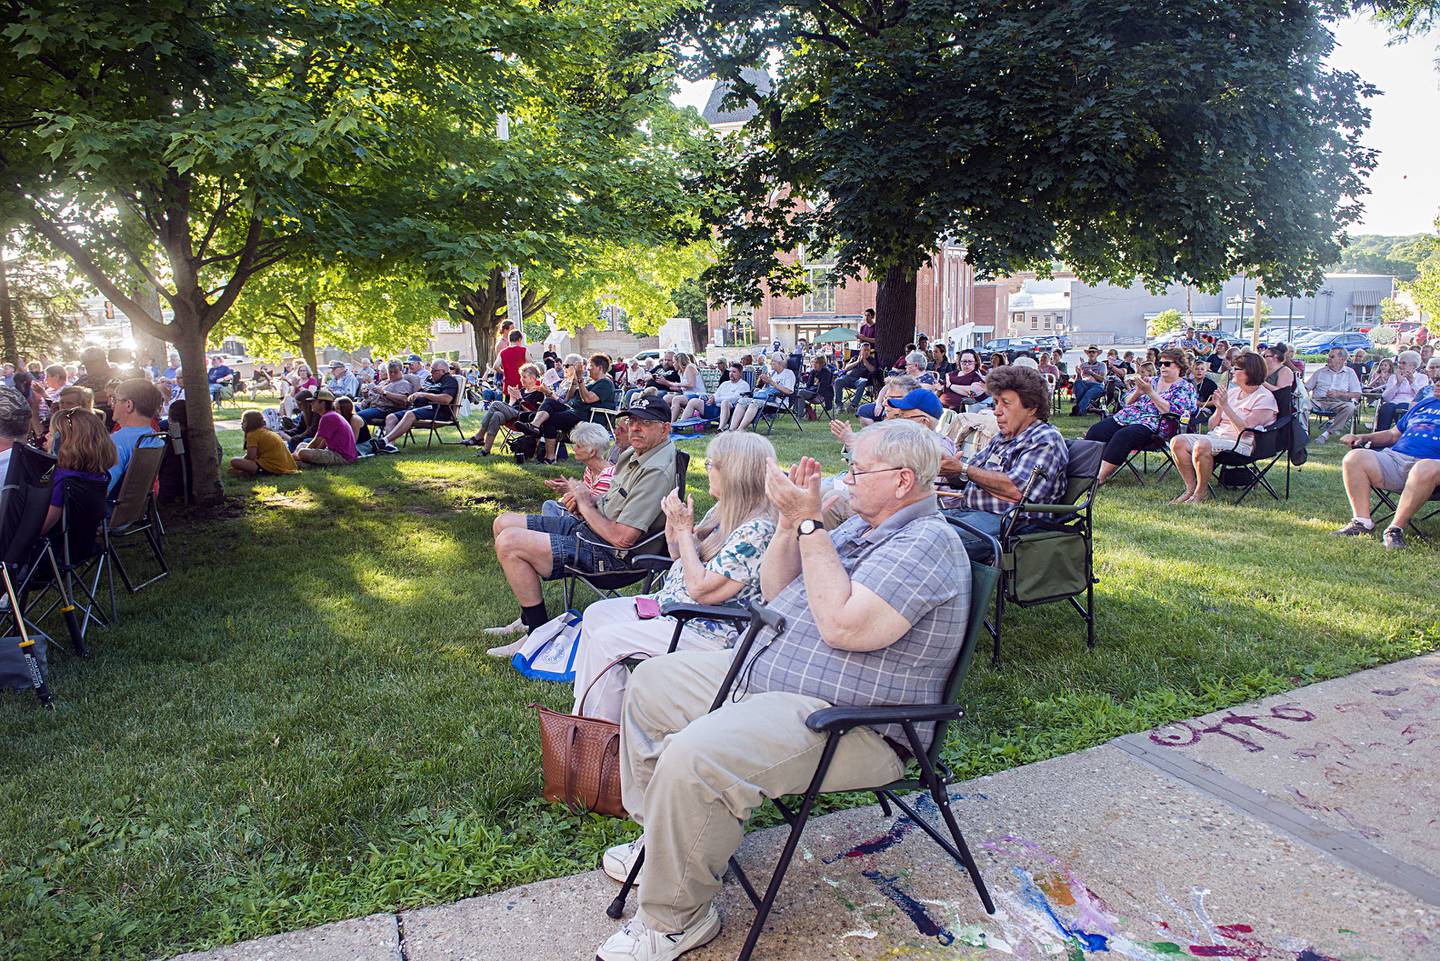 Hundreds of people showed up in support of the Dixon Municipal Band as they played their annual July 4 concert on the lawn of the Old Lee County Courthouse on Friday, July 1, 2022.